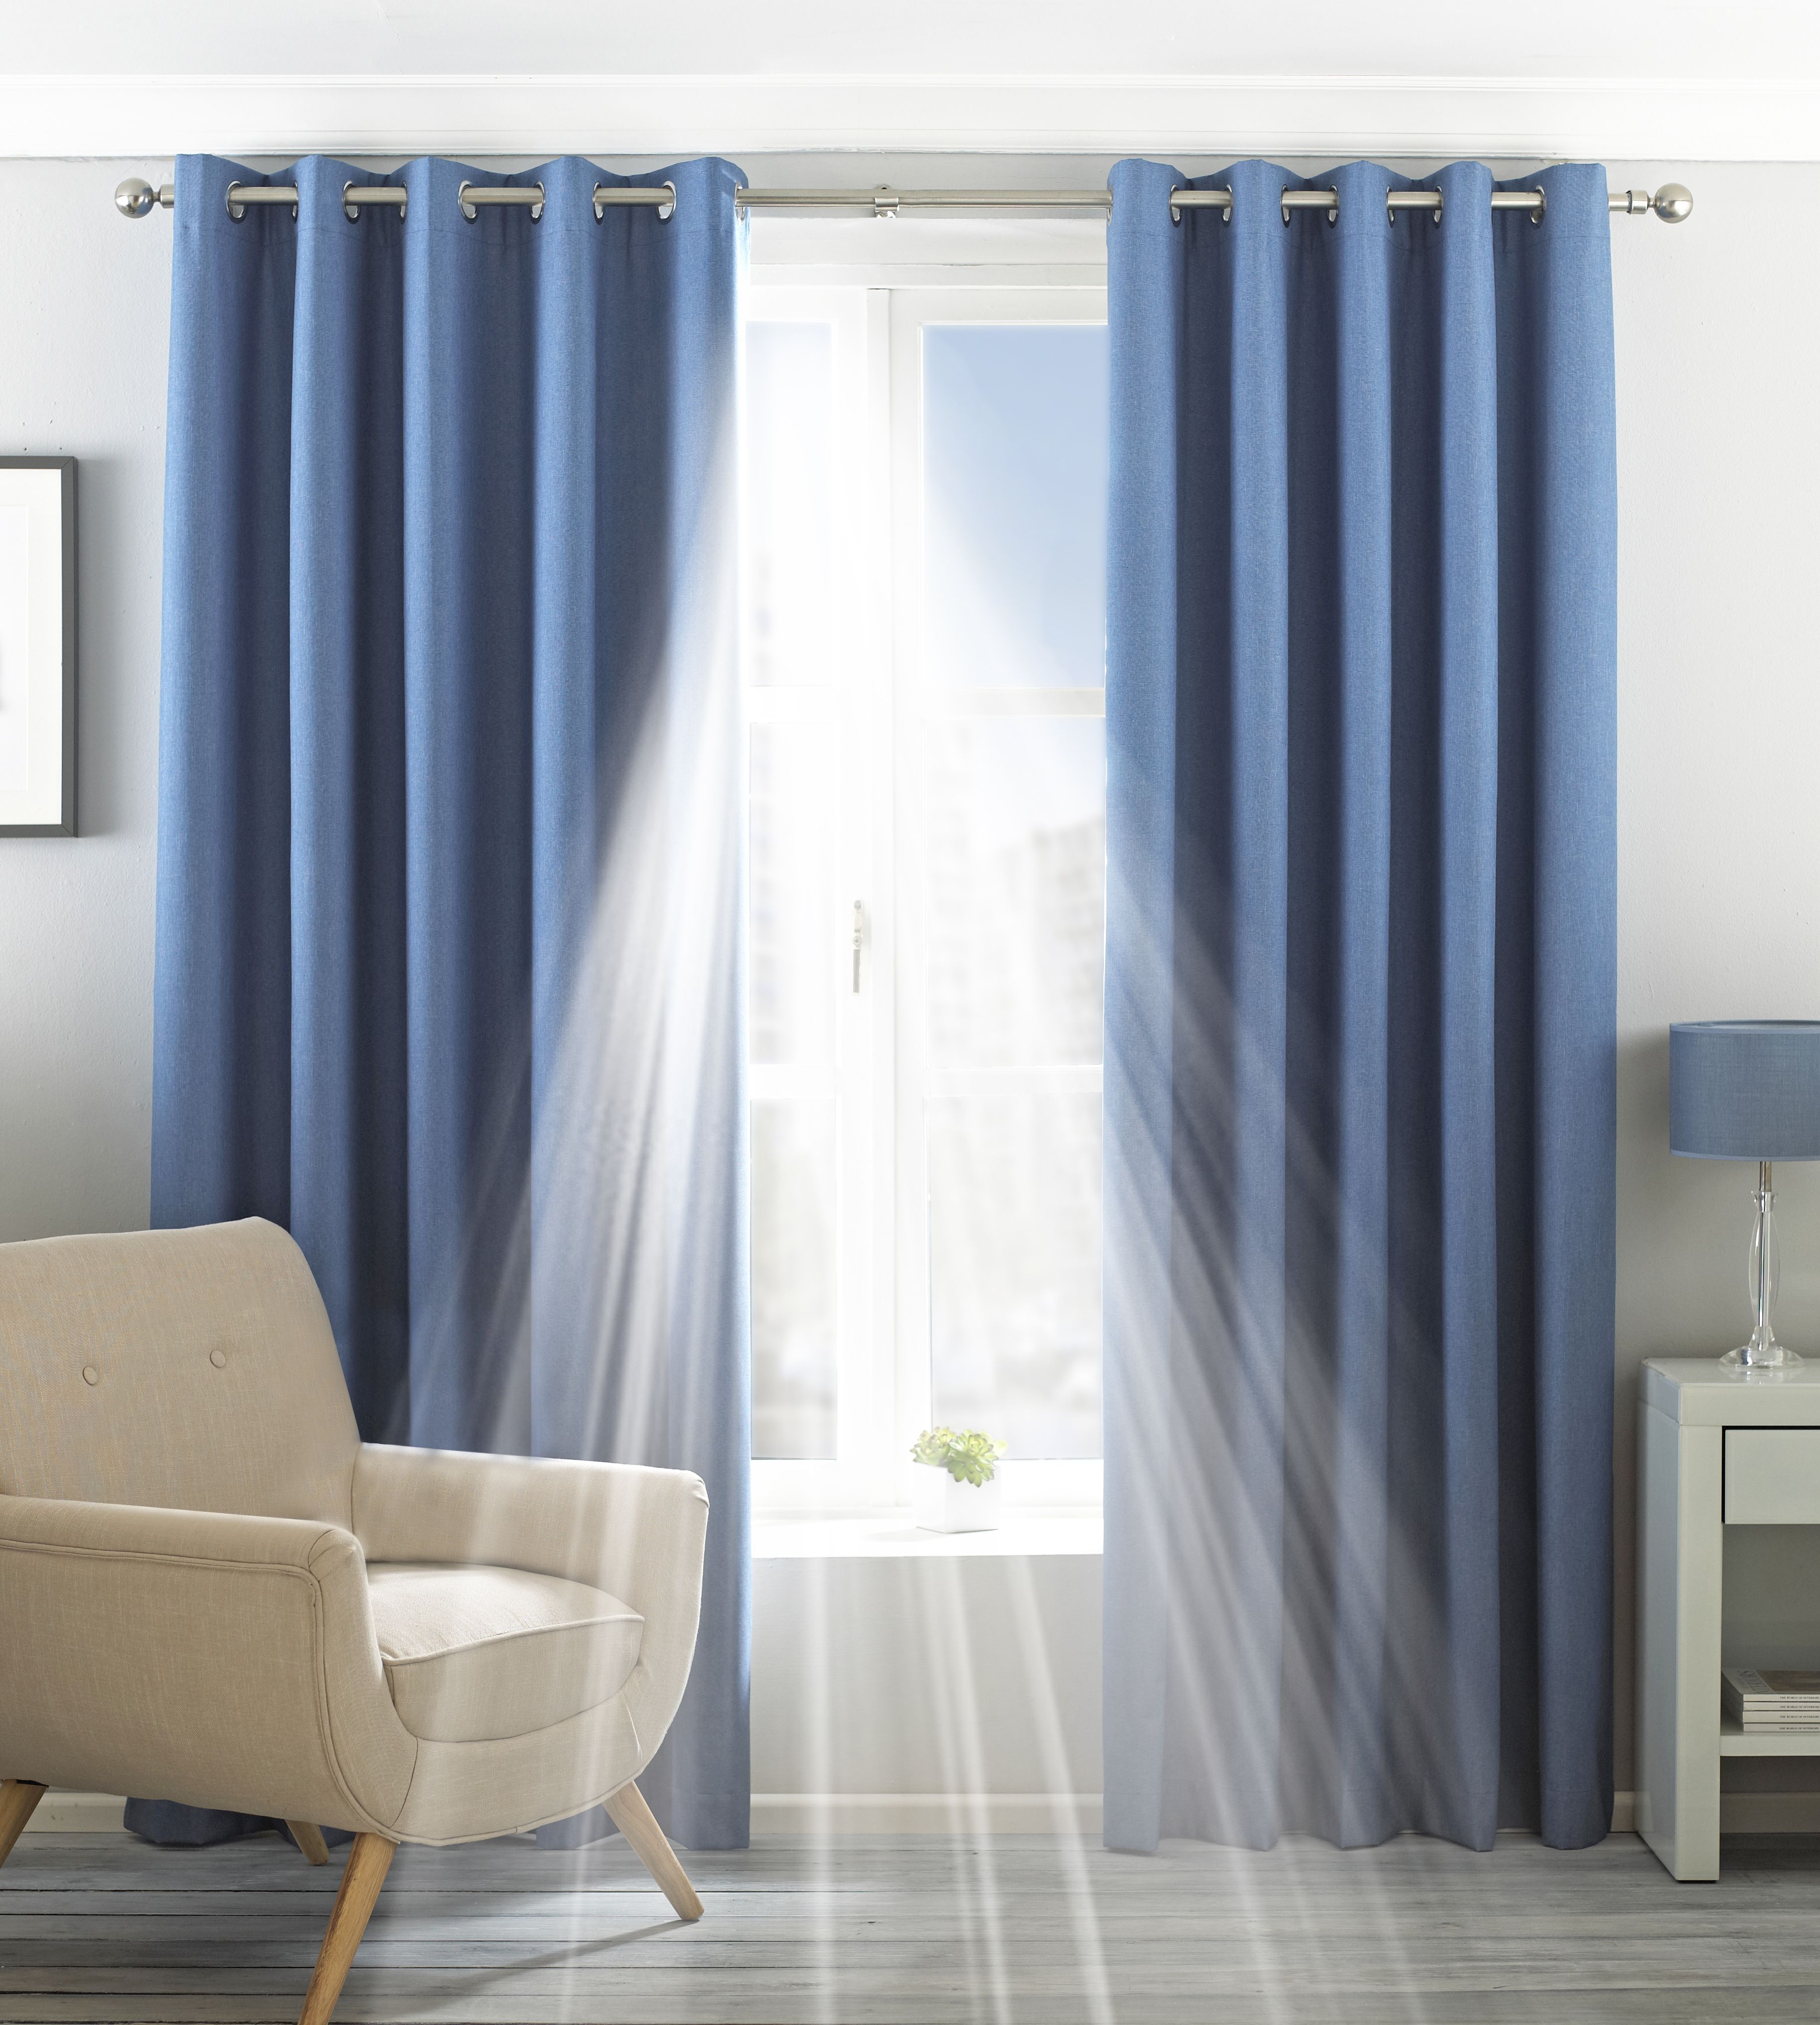 Whether you prefer a bright and cheery room or a more natural atmosphere the Eclipse curtains have a shade for you. These effective blackout curtains have a 3-pass blackout lining to ensure you have the best sleep of your life. The Eclipse curtain is an energy efficient choice as they are temperature controlled making your room cool in summer and warm in winter. With stainless steel eyelet holes the Eclipse curtains are easy to hang and only require a curtain pole for installation. They are surprisingly easy to clean as they are machine washable making them perfect for a household with children or pets.